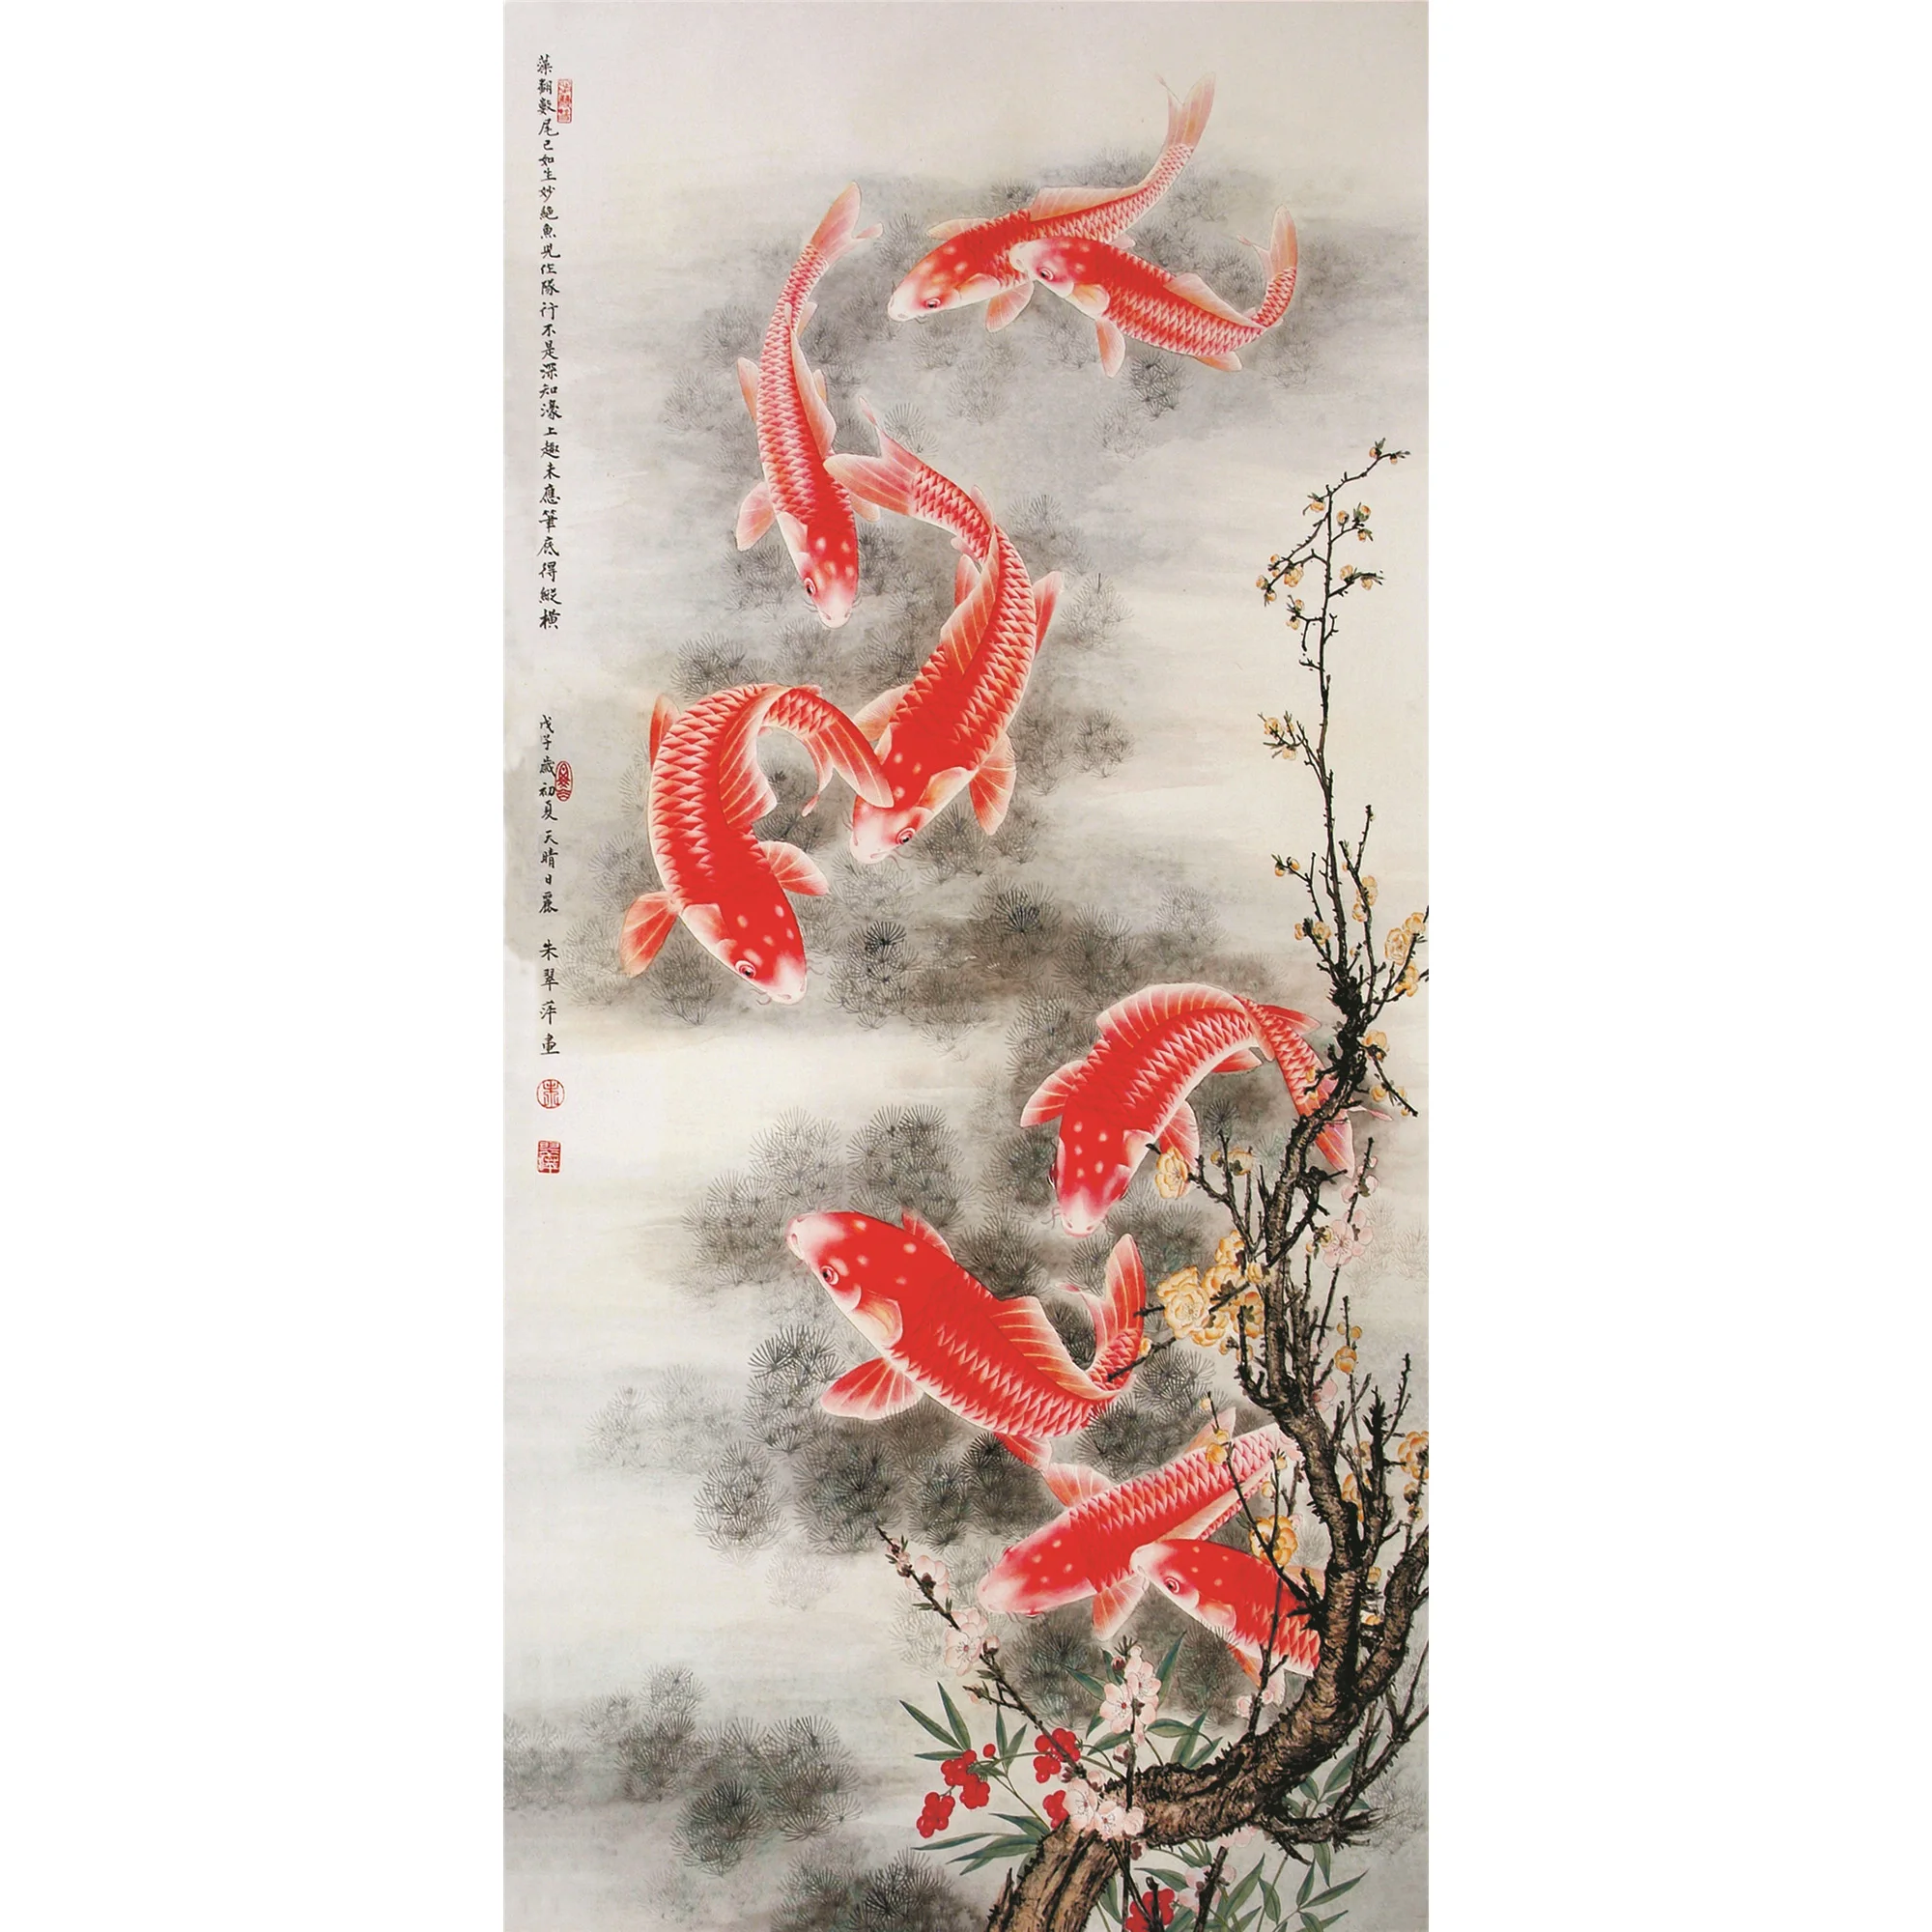 

Wall art, Painting by numbers, ,Chinese Traditional Silk Scroll Painting Wall Pictures,Silk Wall Poster Prints ,- Red fish